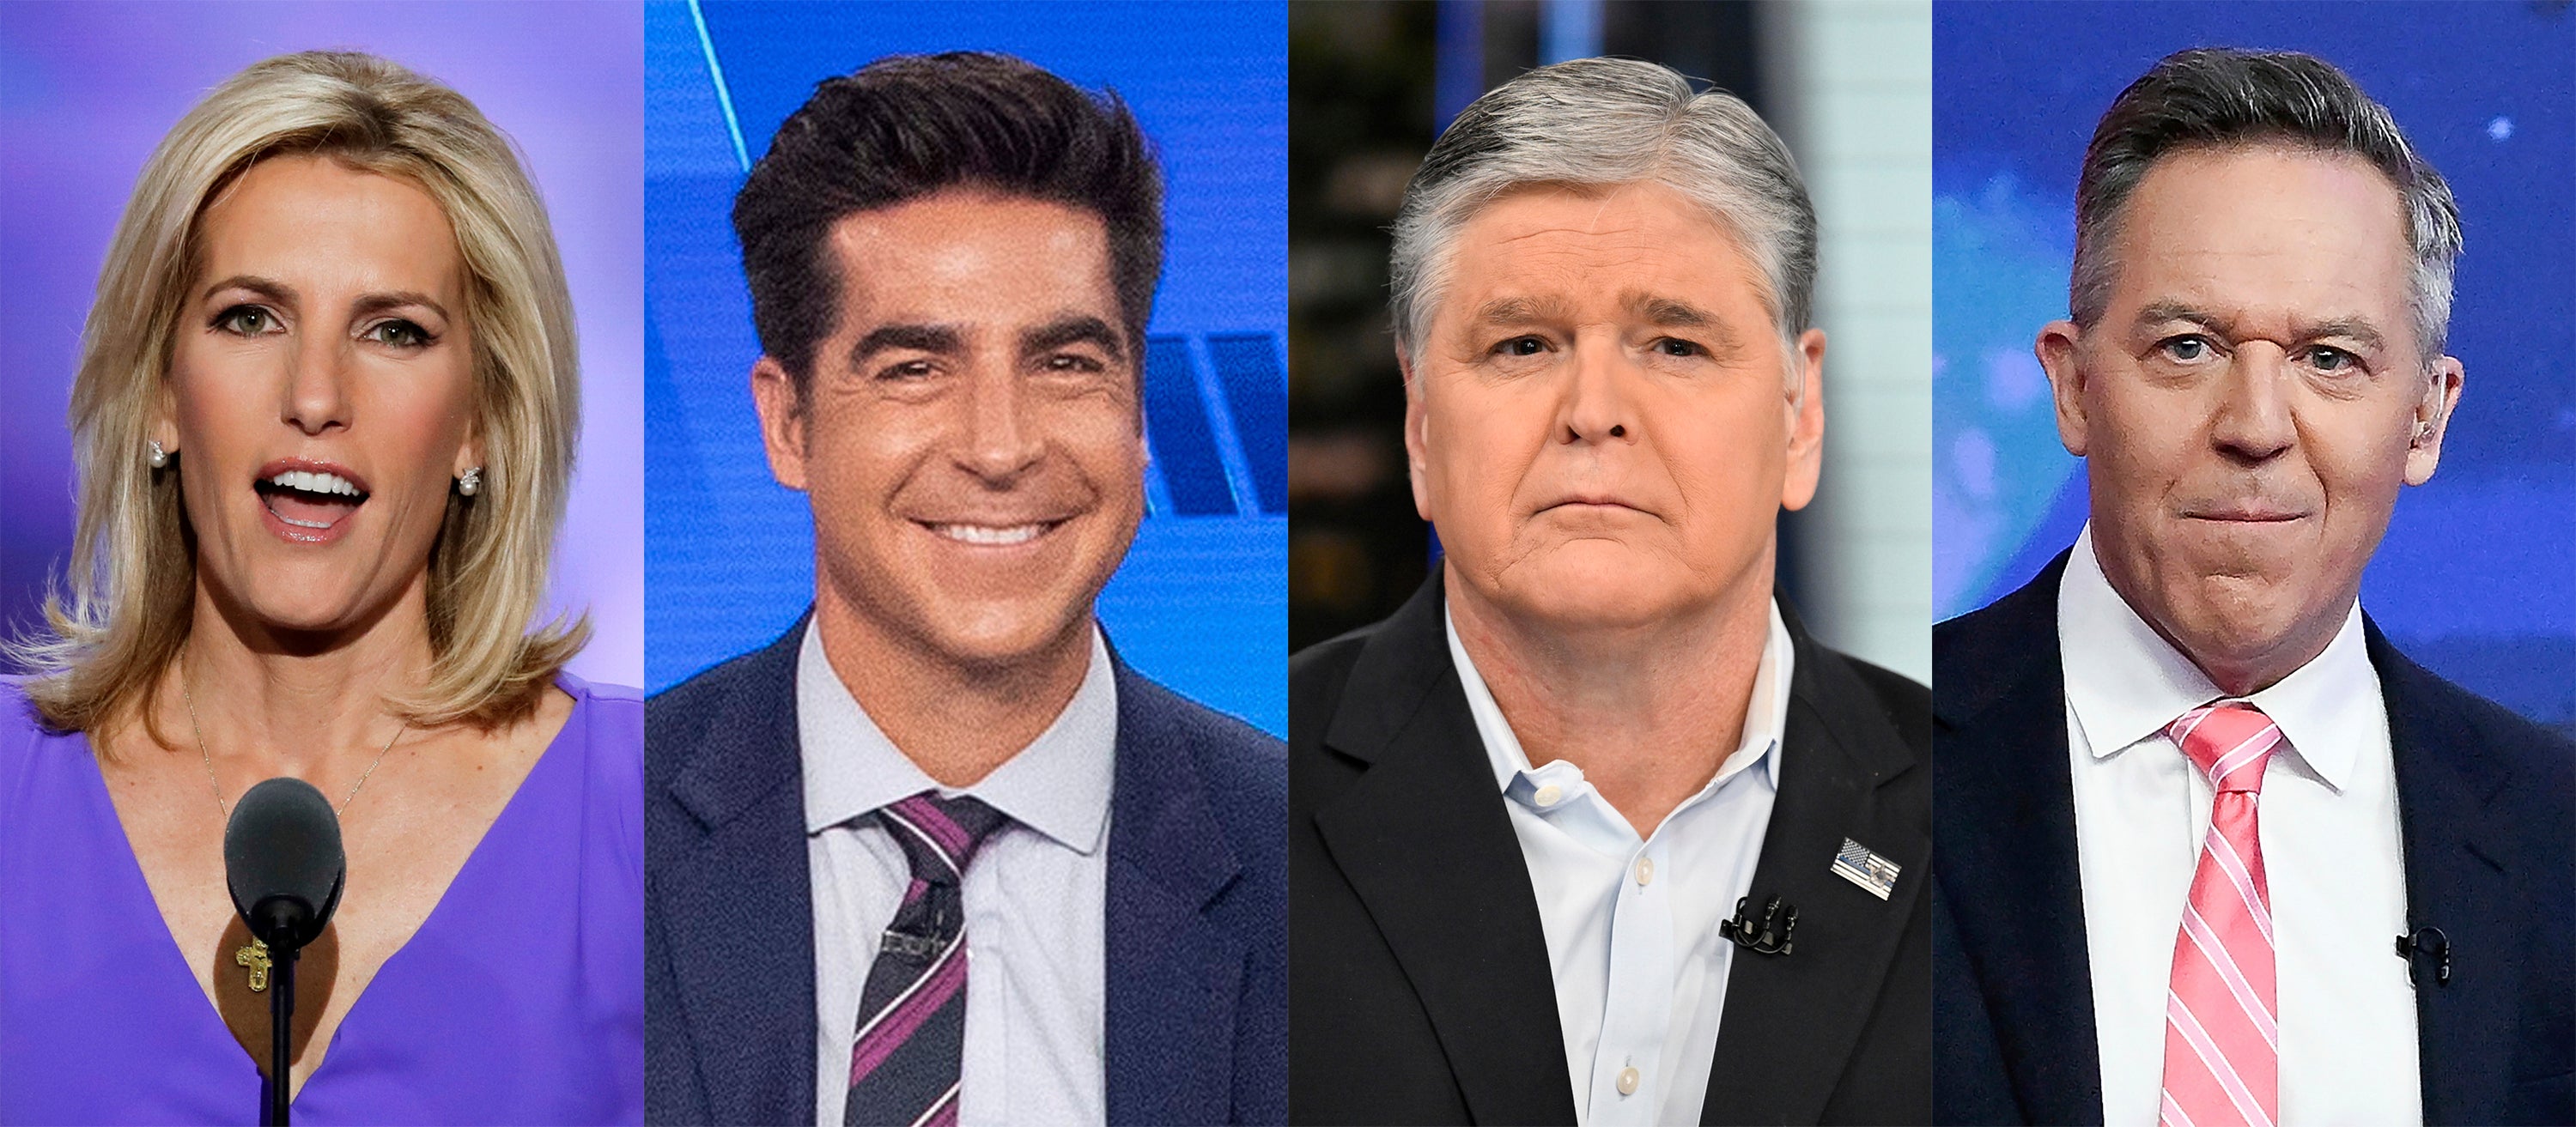 Fox News personalities, from left, Laura Ingraham, Jesse Watters, Sean Hannity and Greg Gutfeld will helm the network’s primetime lineup.